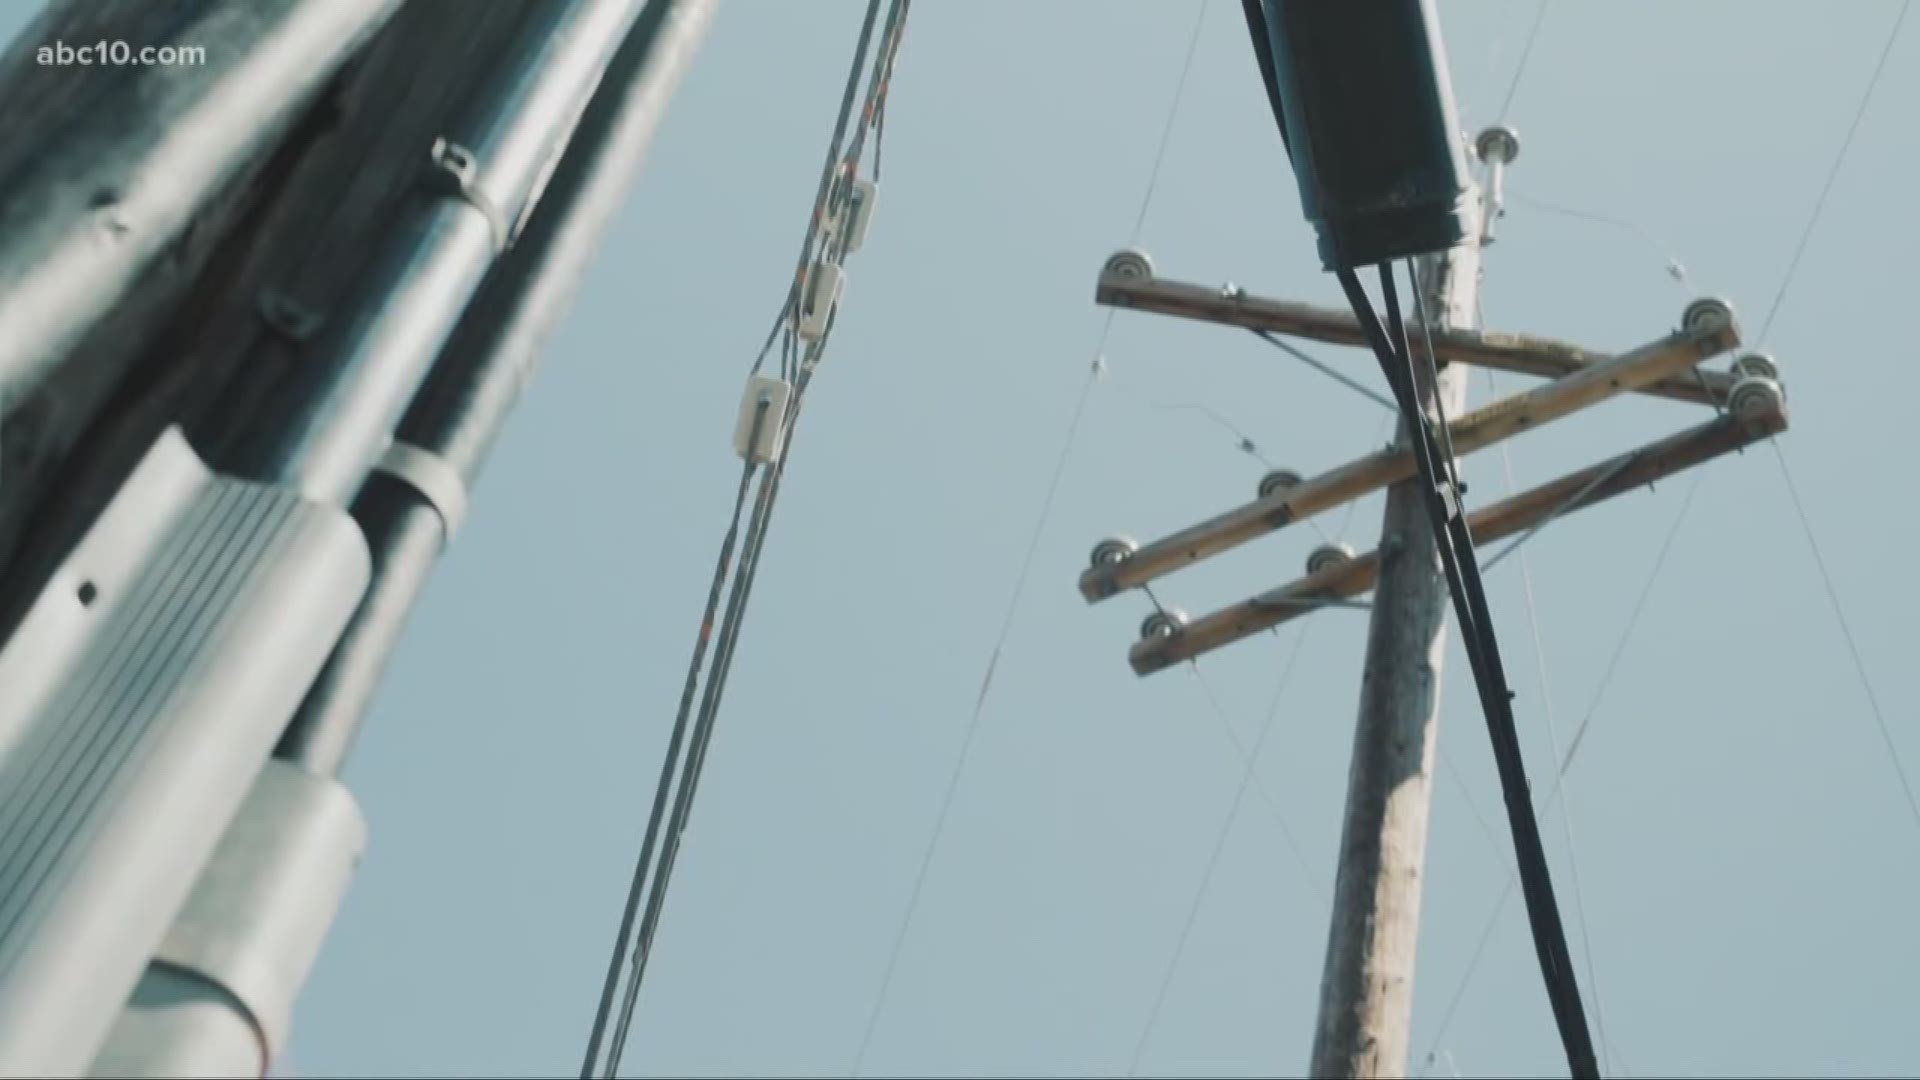 Using ground crews and even helicopters, PG&E said they made sure to inspect all electrical lines before turning the power back on following a shutoff.